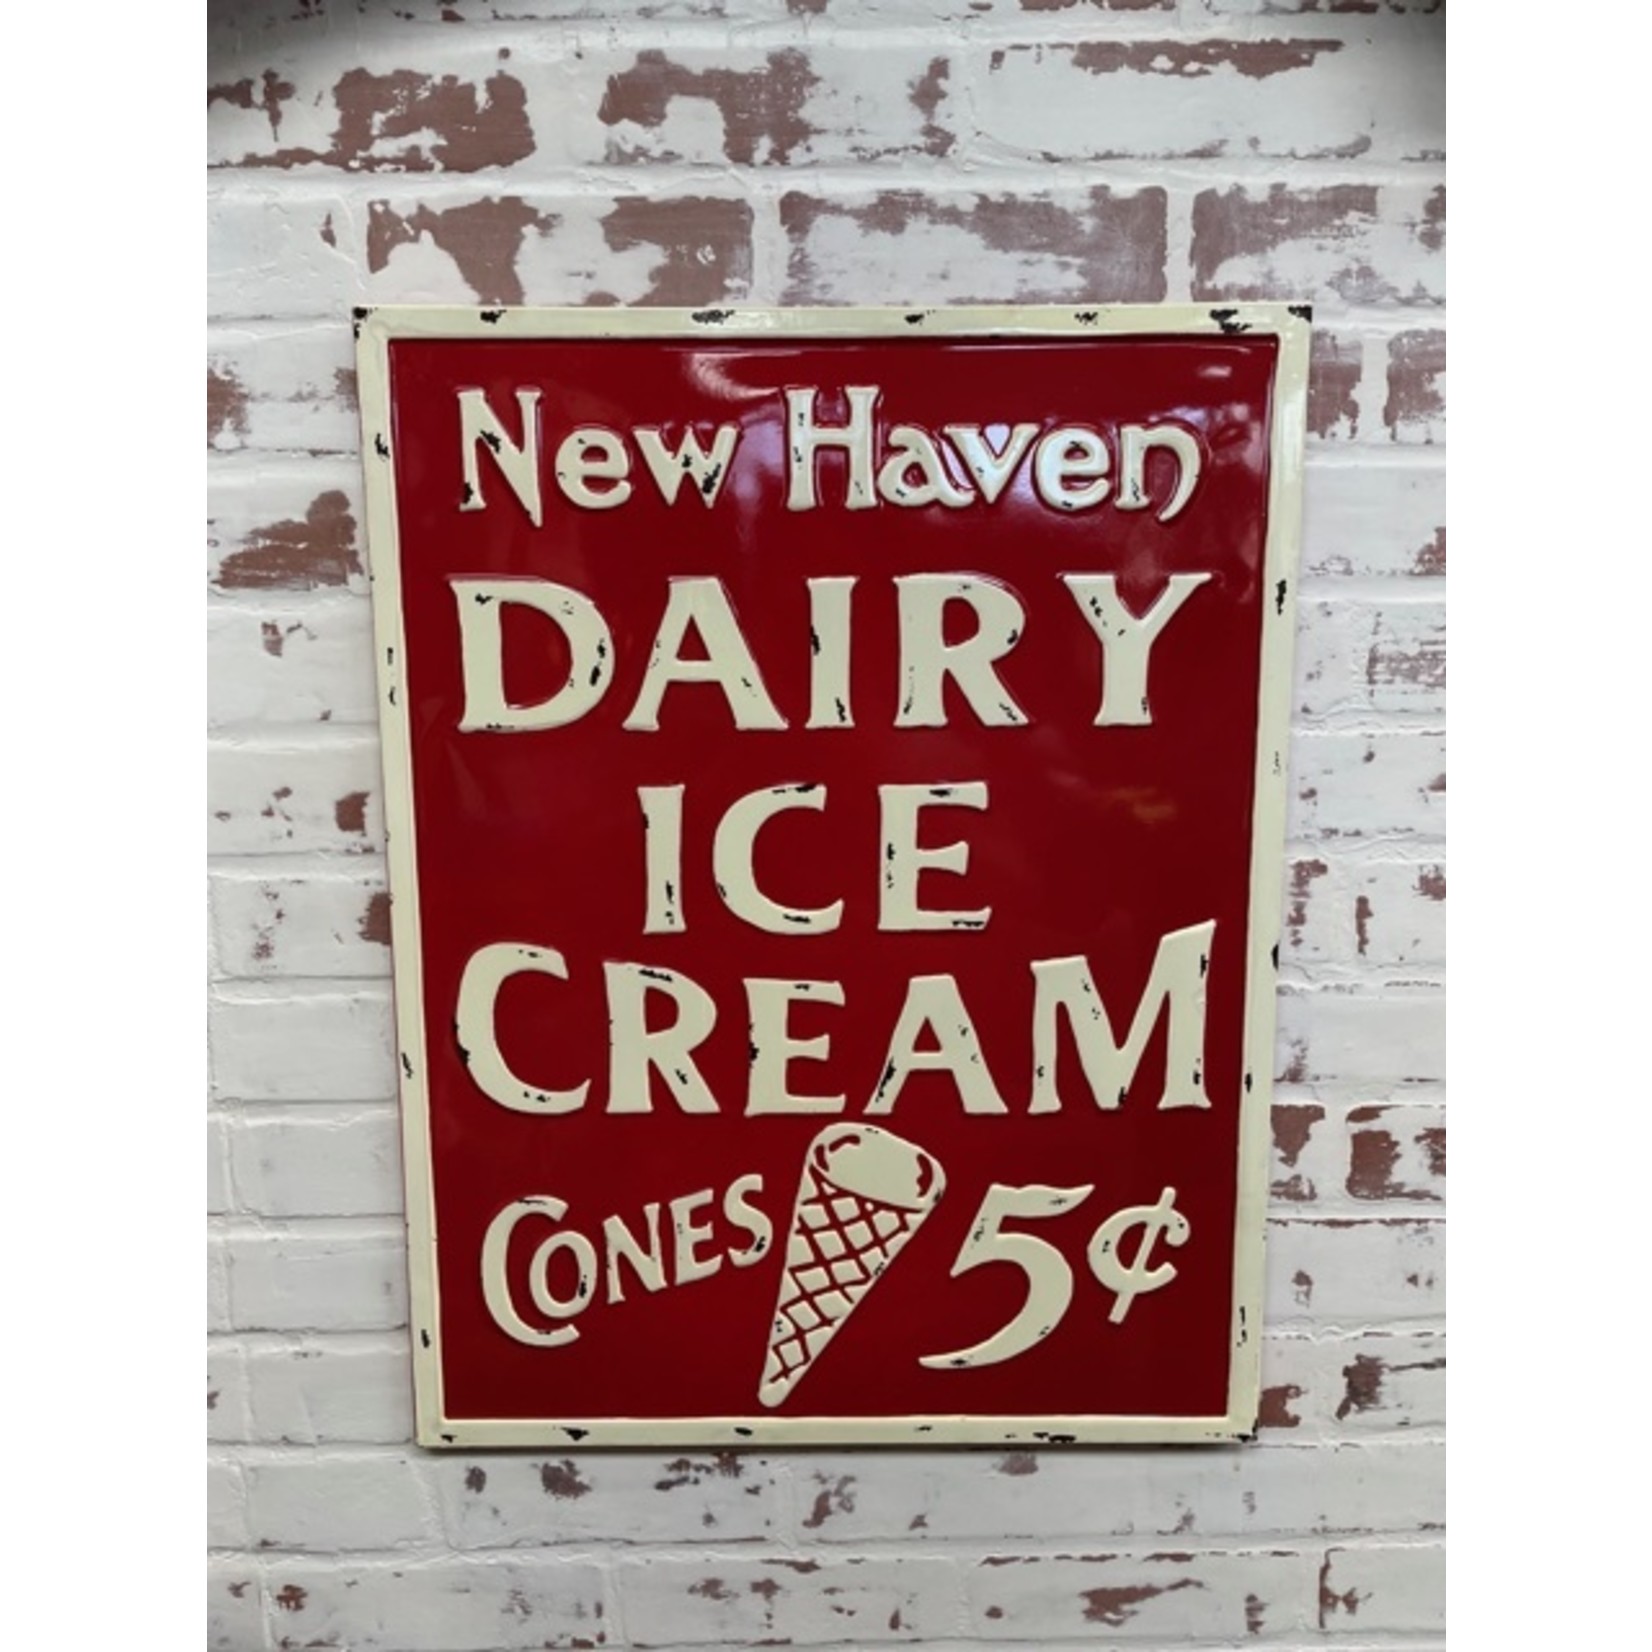 New Haven Dairy